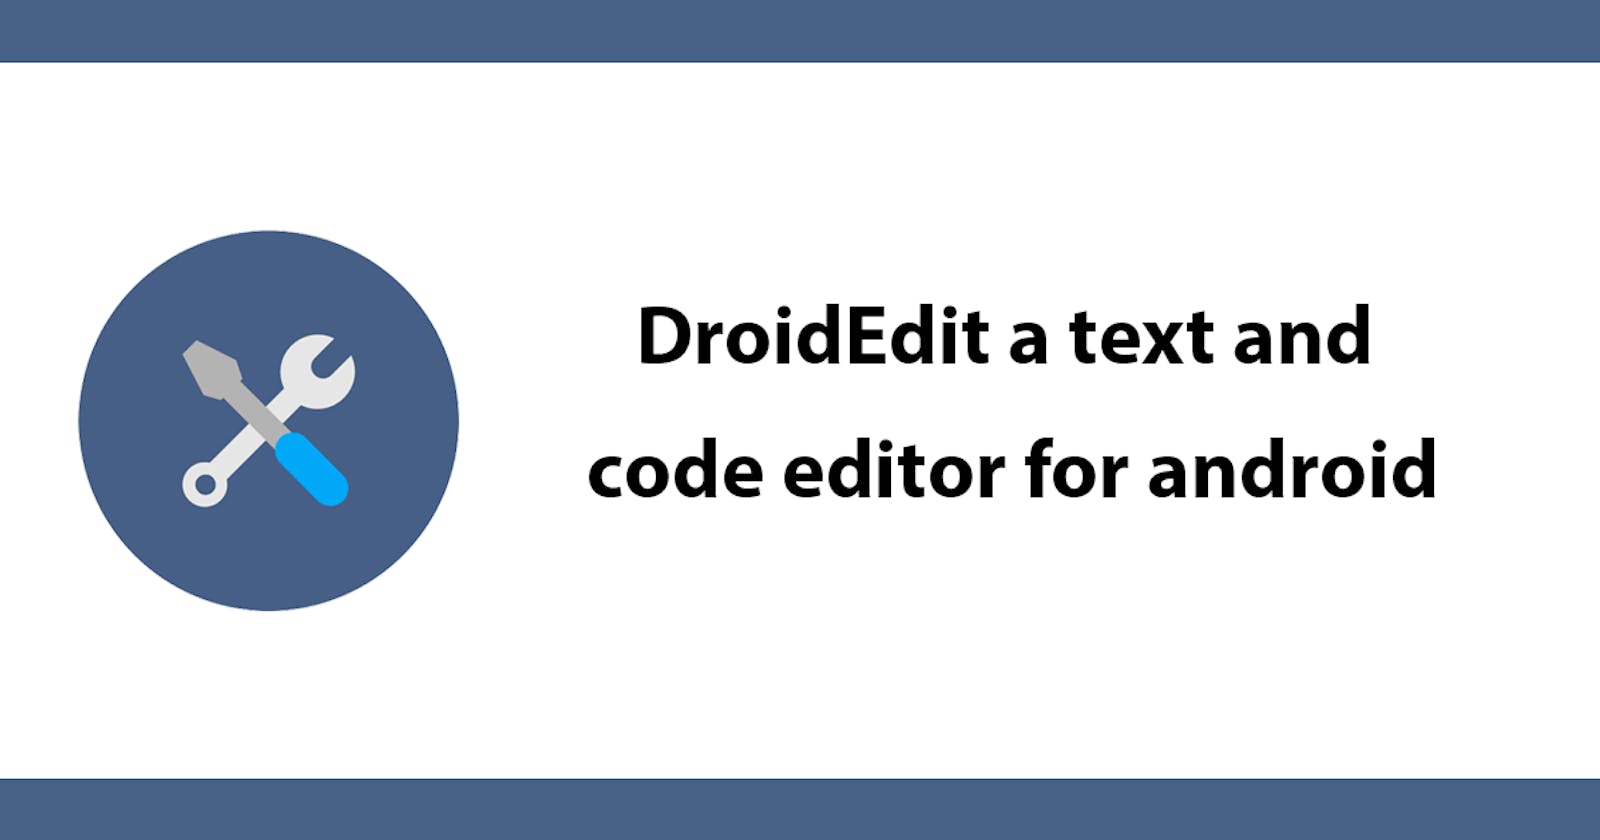 DroidEdit A text and code editor for android